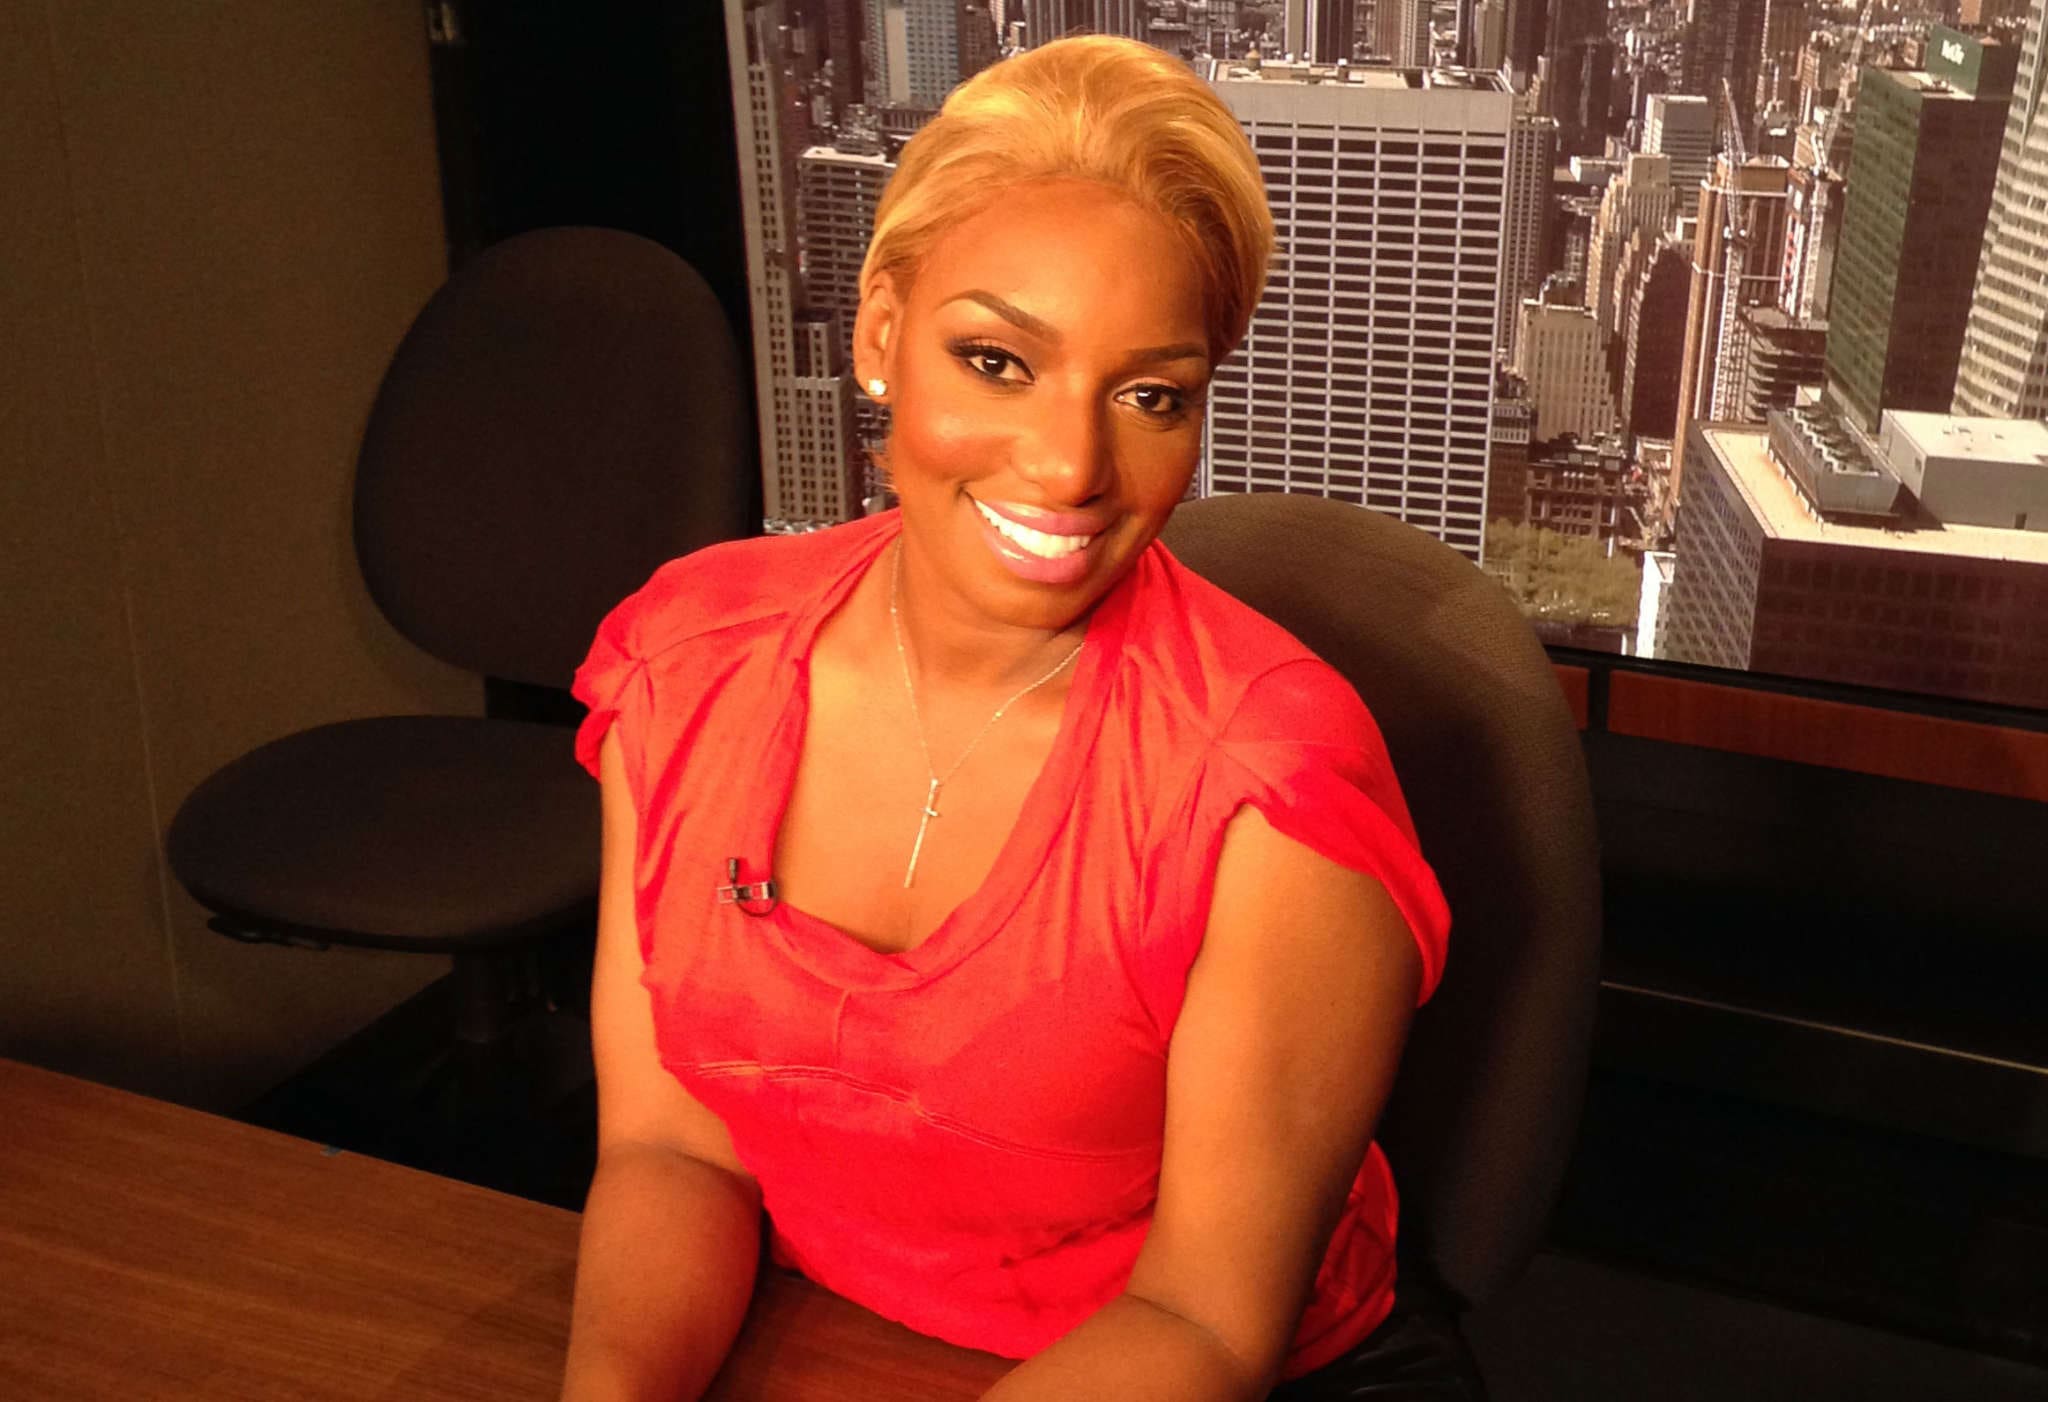 NeNe Leakes Breaks The Internet With The Latest Photos In Which She Shows Off Her Beach Body - People Accuse Her Of Editing The Pics